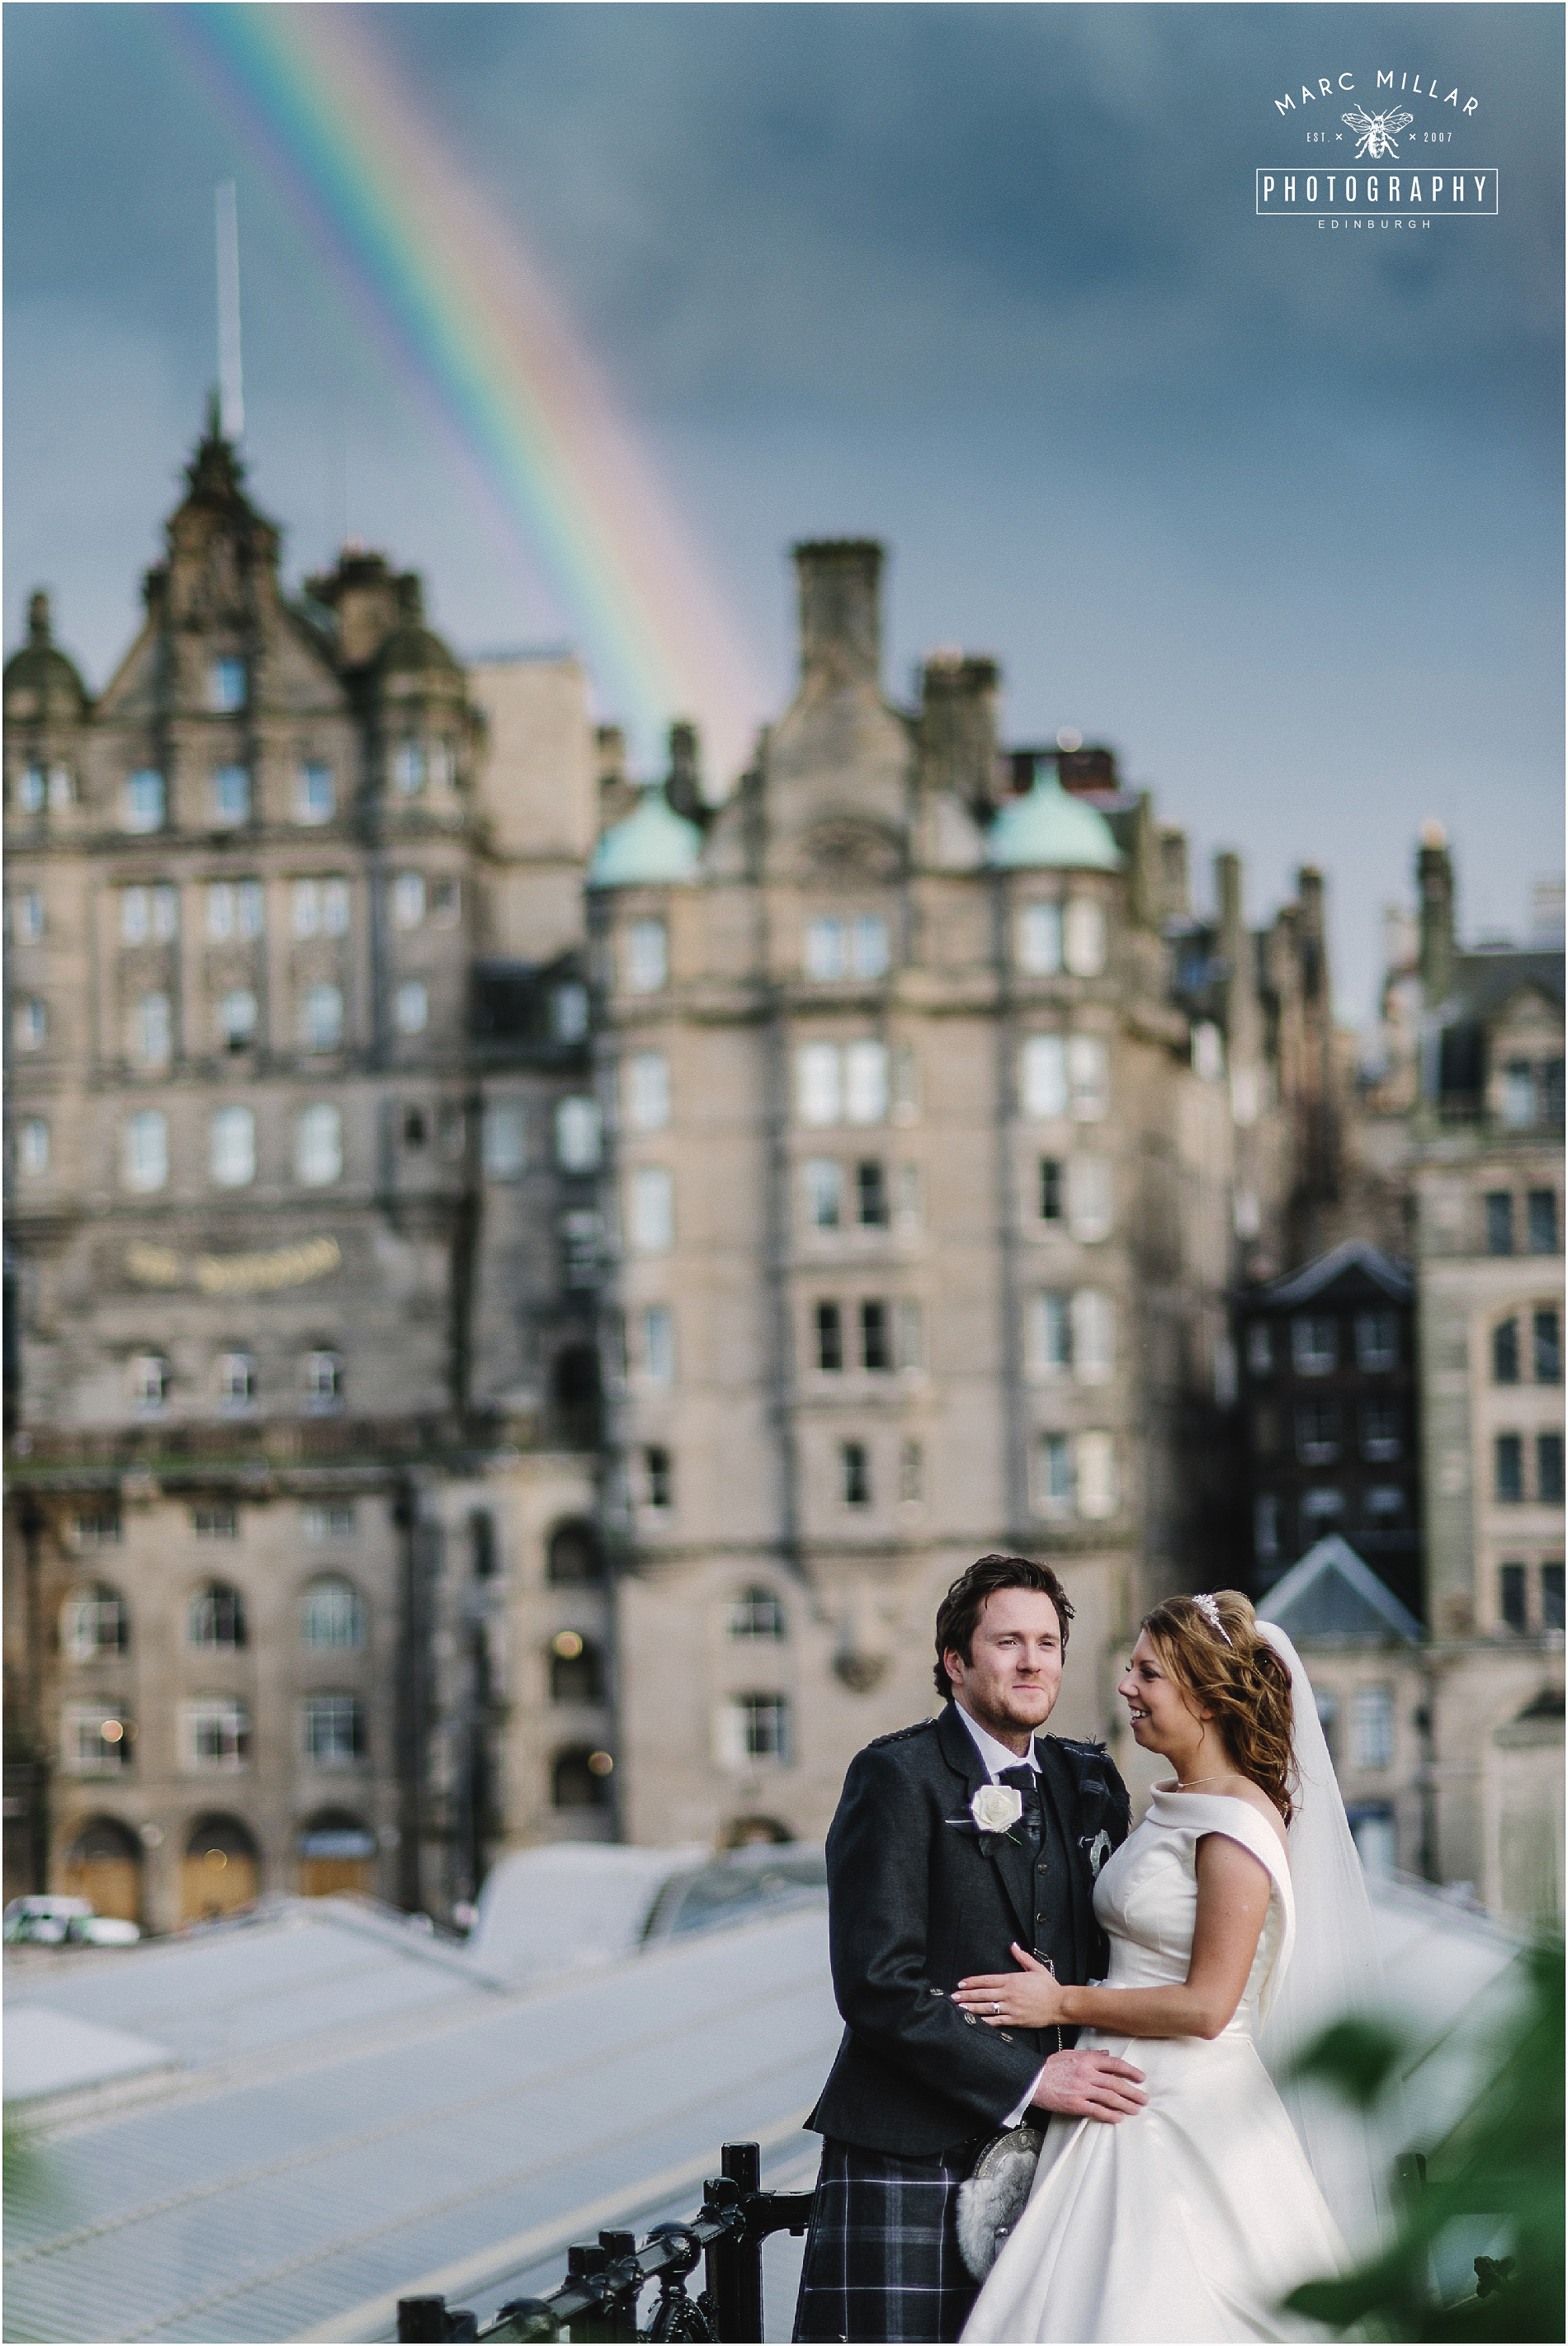  The Balmoral Wedding by Marc Millar Photography 